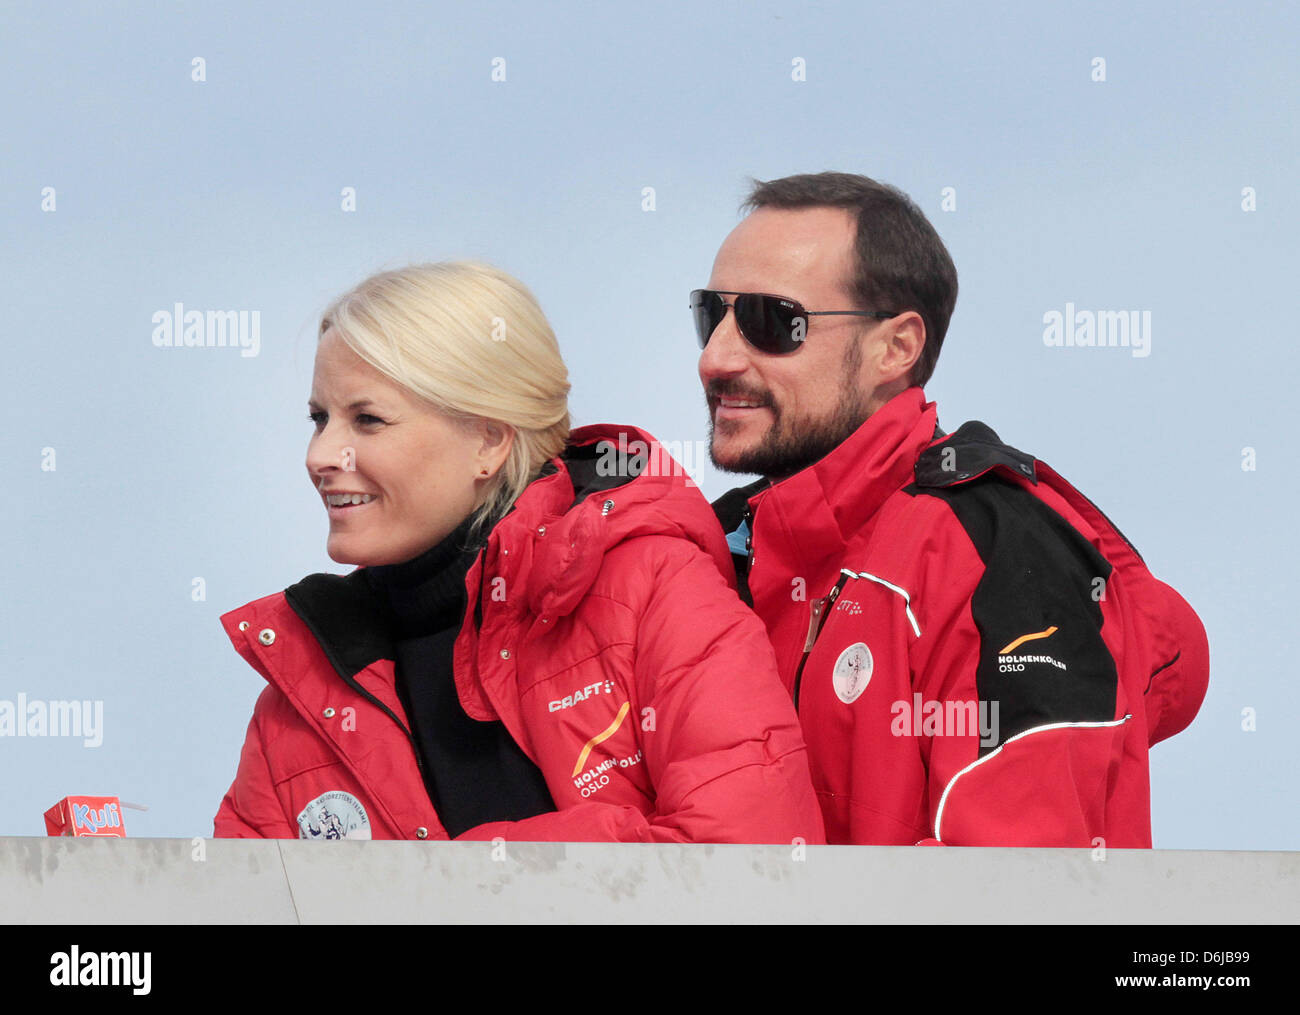 Crown Princess Mette-Marit and Crown Prince Haakon of Norway visit the ski jumping FIS World Cup at the Holmenkollen in Oslo, Norway, 11 March 2012. Photo: Albert Nieboer / NETHERLANDS OUT Stock Photo